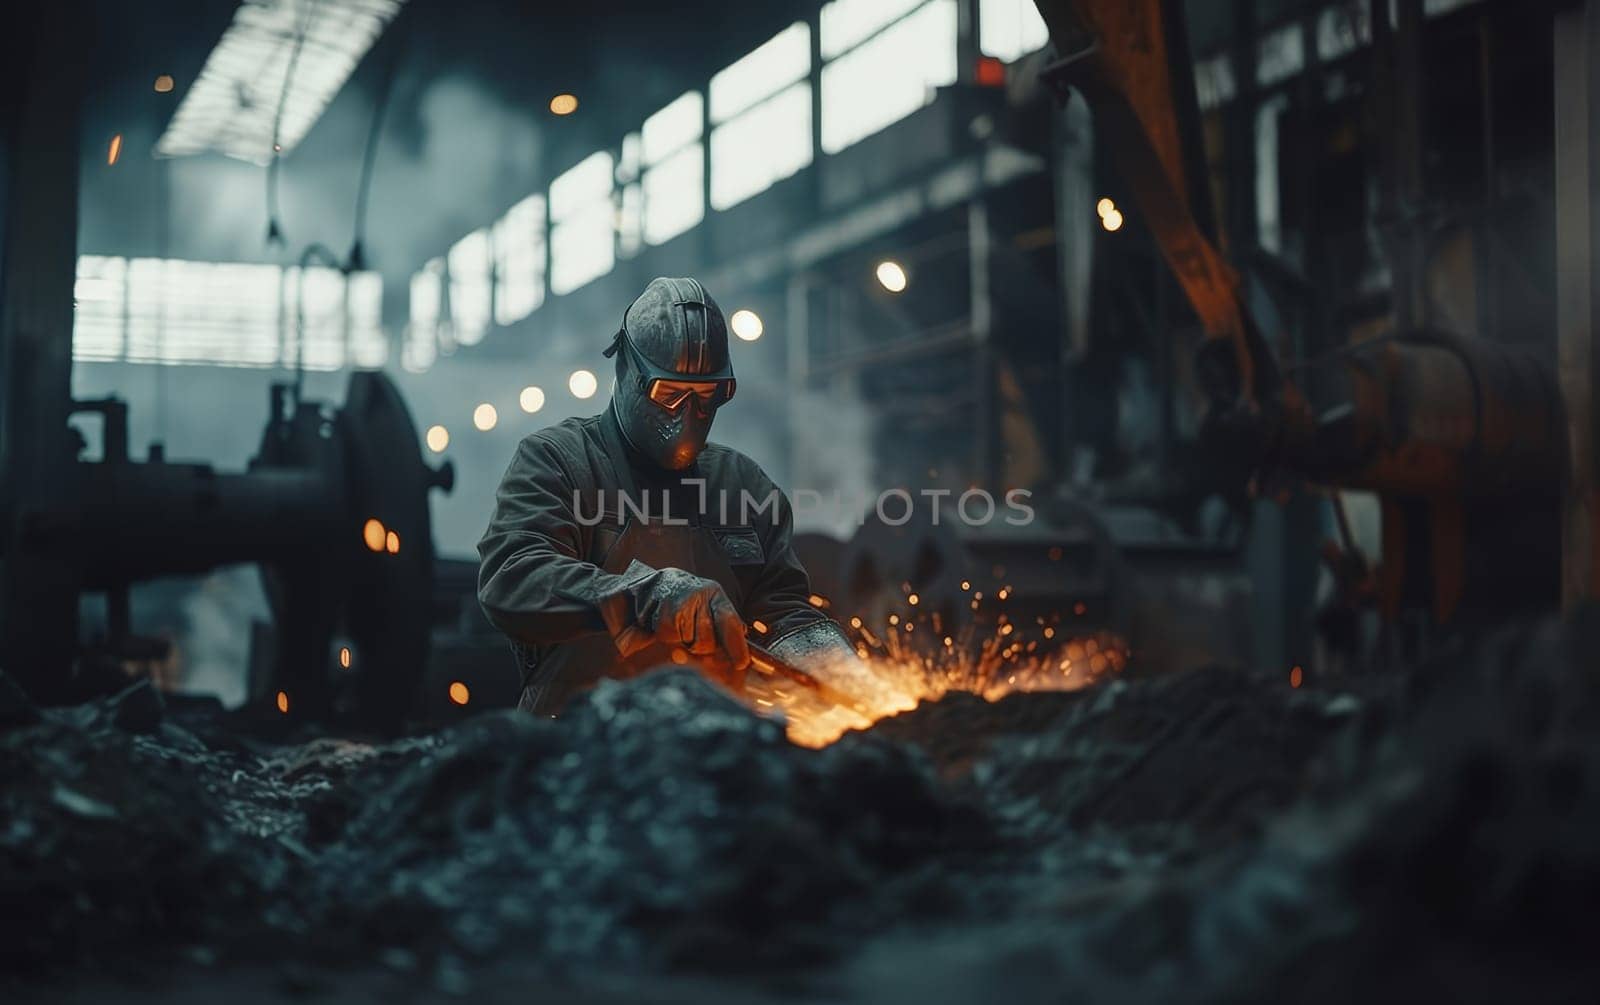 Welder in full gear ignites sparks while working on metal in a dimly lit shop. by sfinks